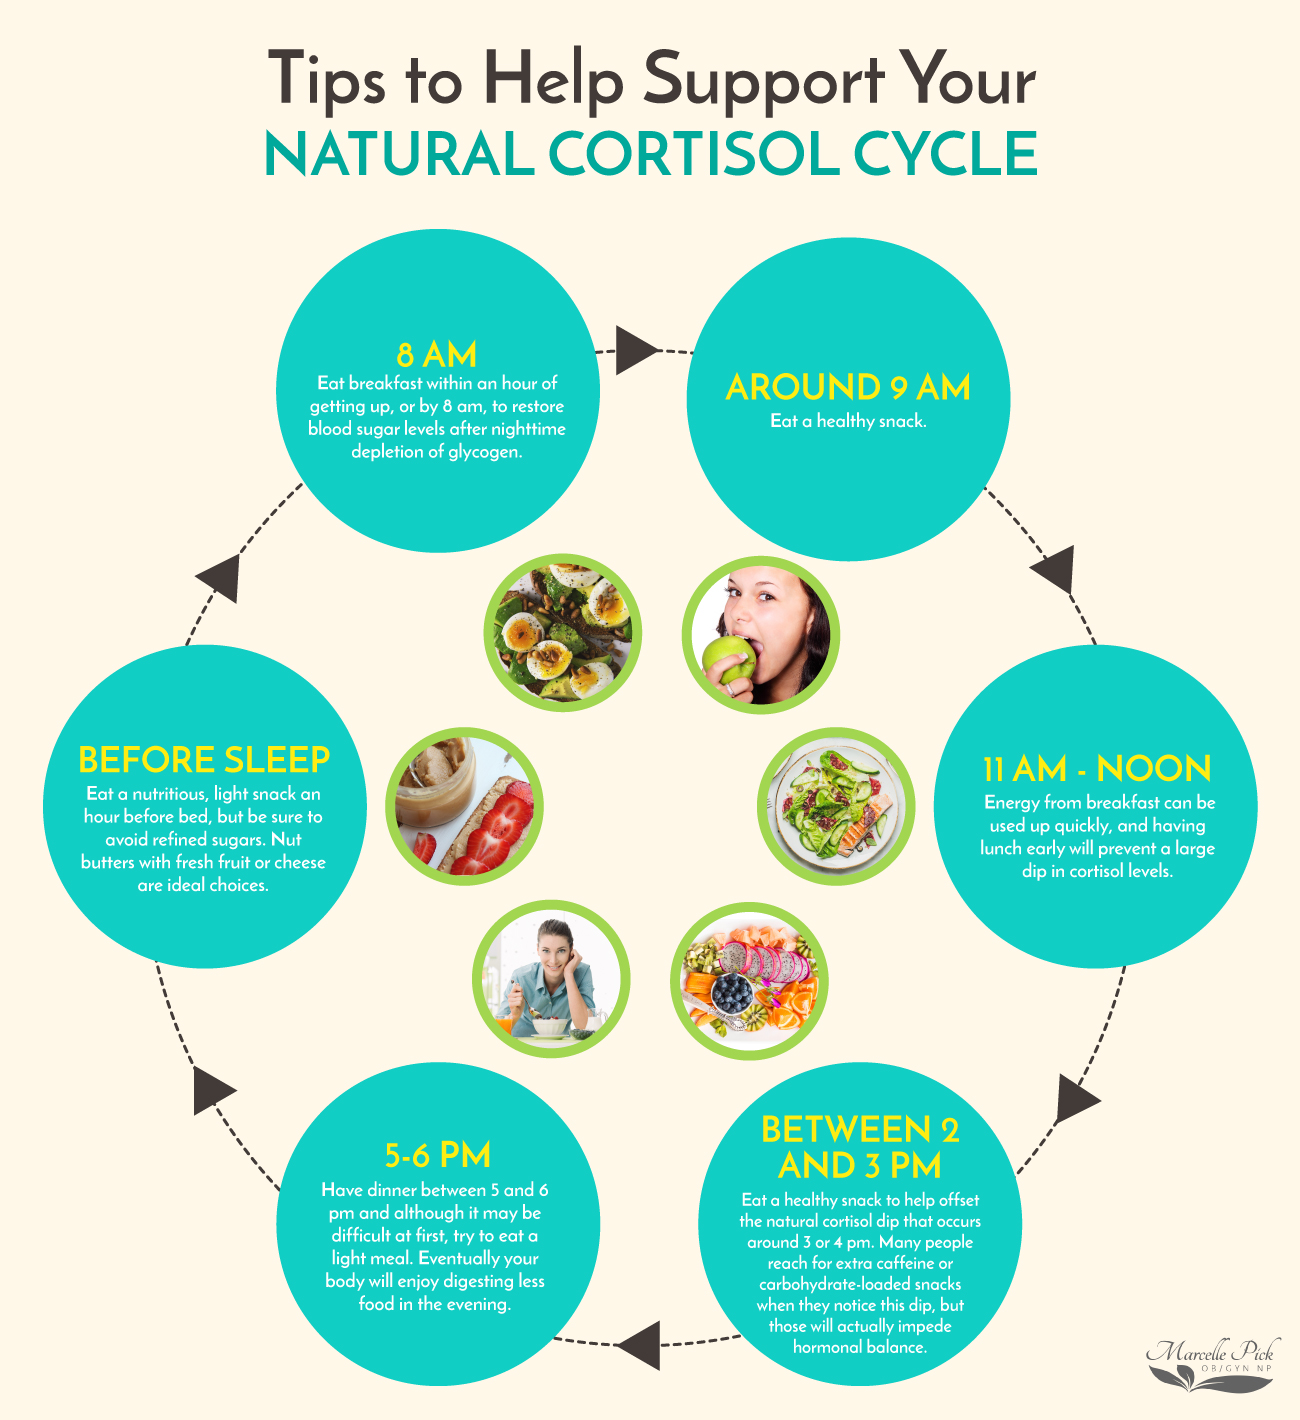 Tips to help support your natural cortisol cycle infographic